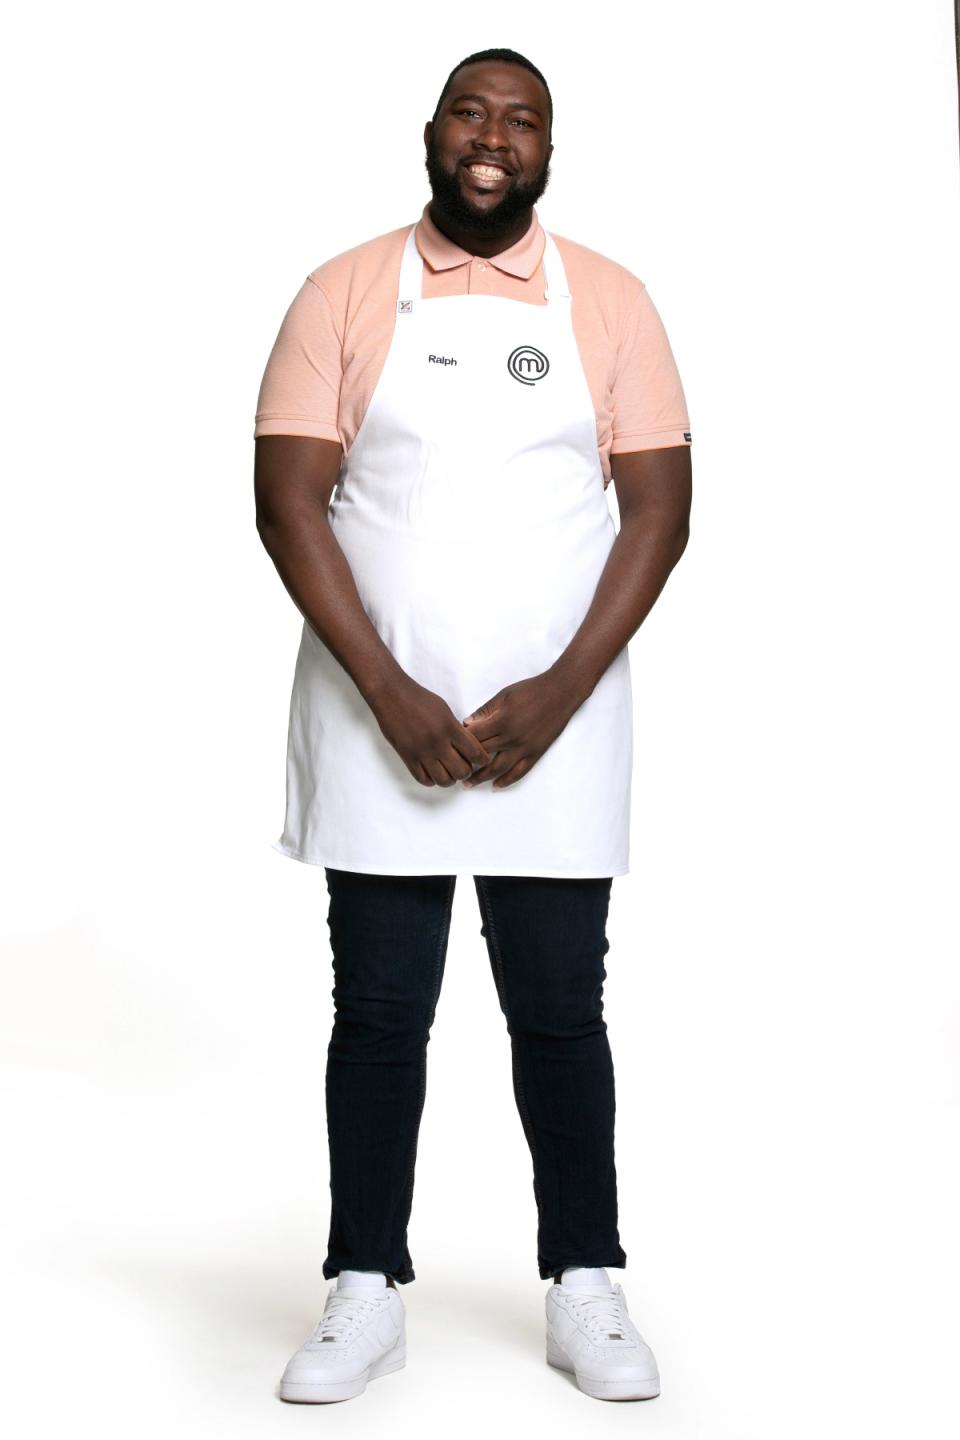 Ralph is looking forward to sharing his Zimbabwean culture, traditions and cuisine with the judges, as well as the rest of Australia. Source: Network 10